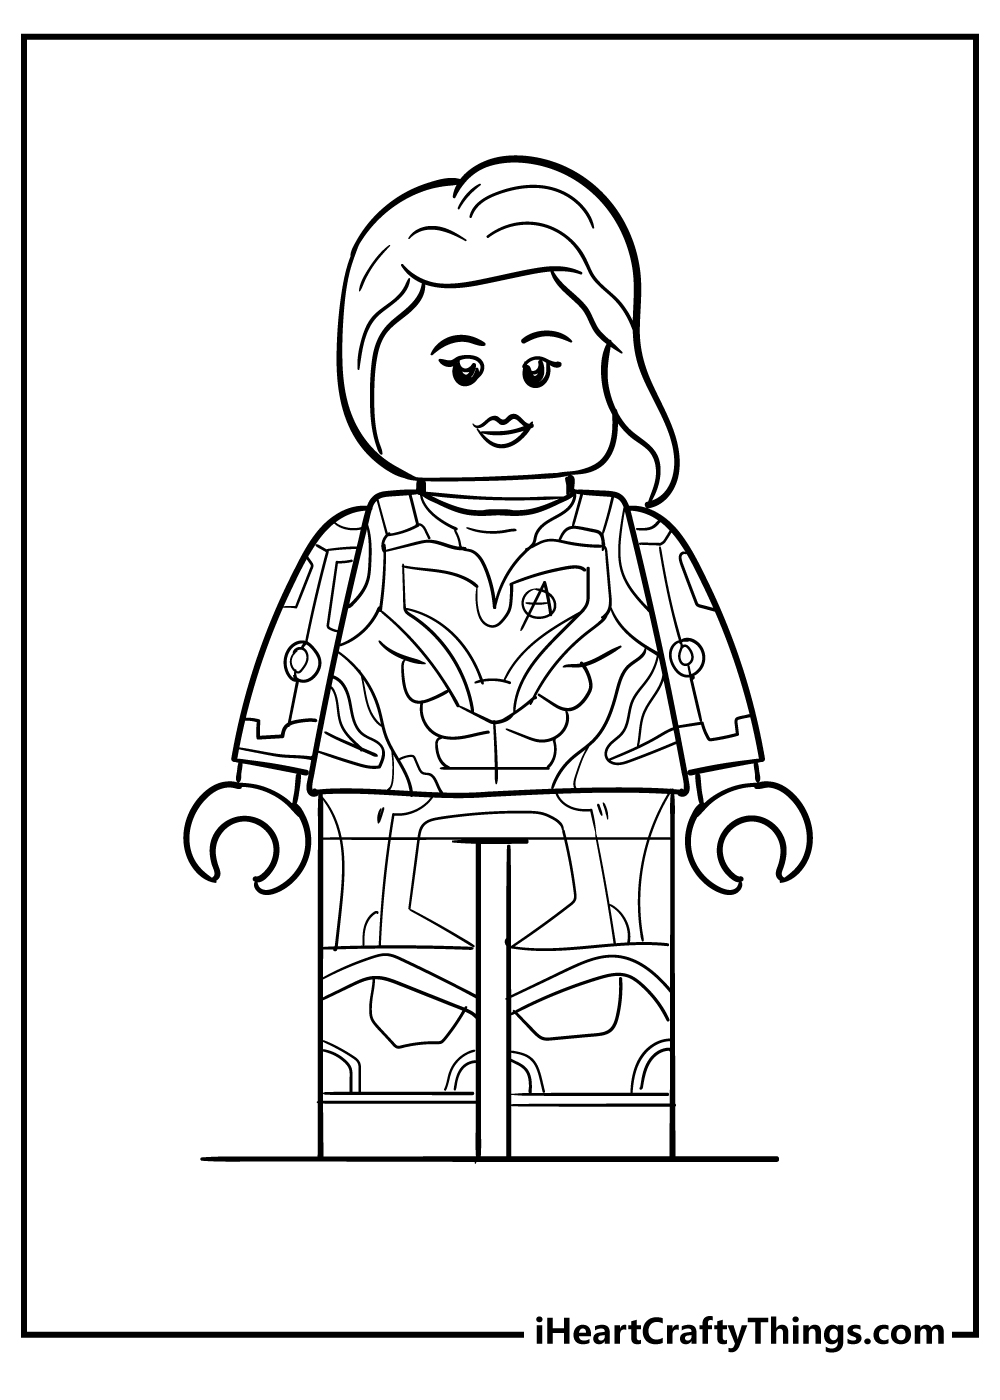 Lego avengers coloring pages free printables